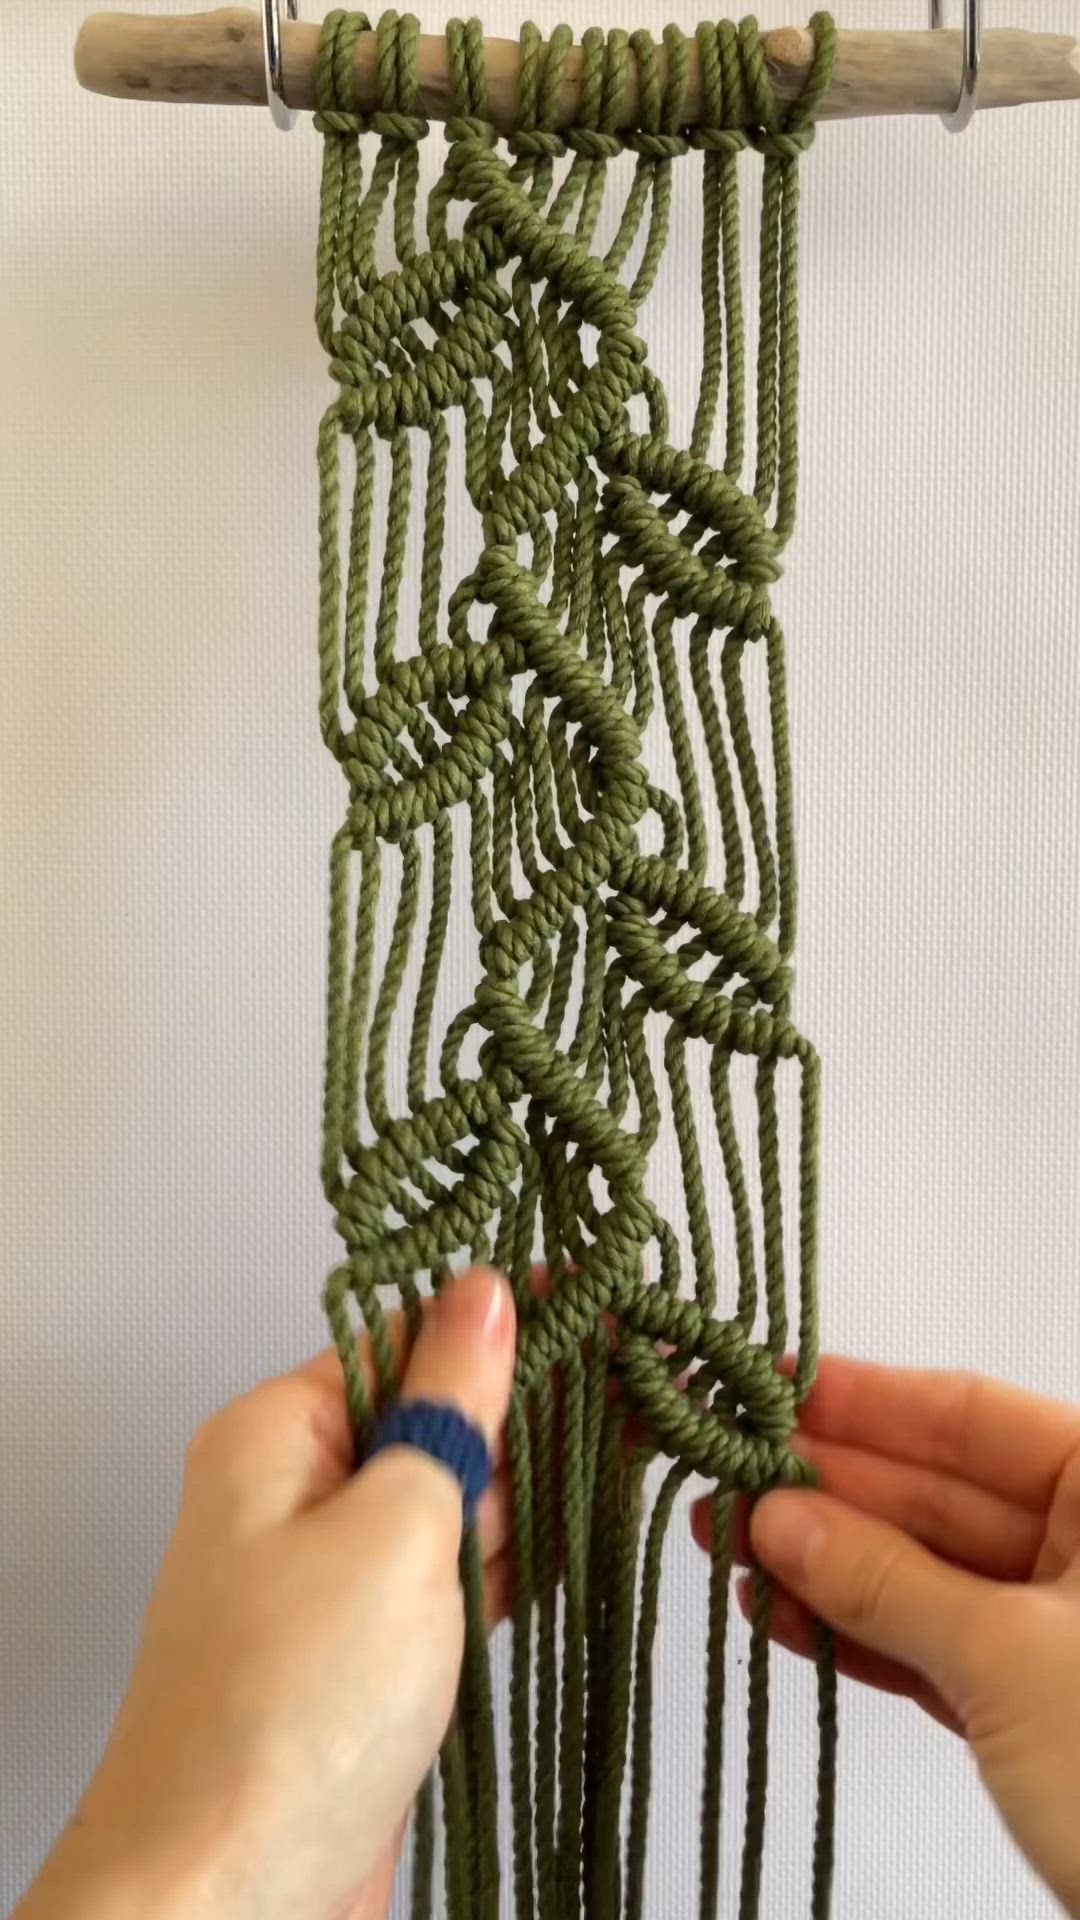 This may contain: two hands are working on a piece of green string art that is hanging from a wall